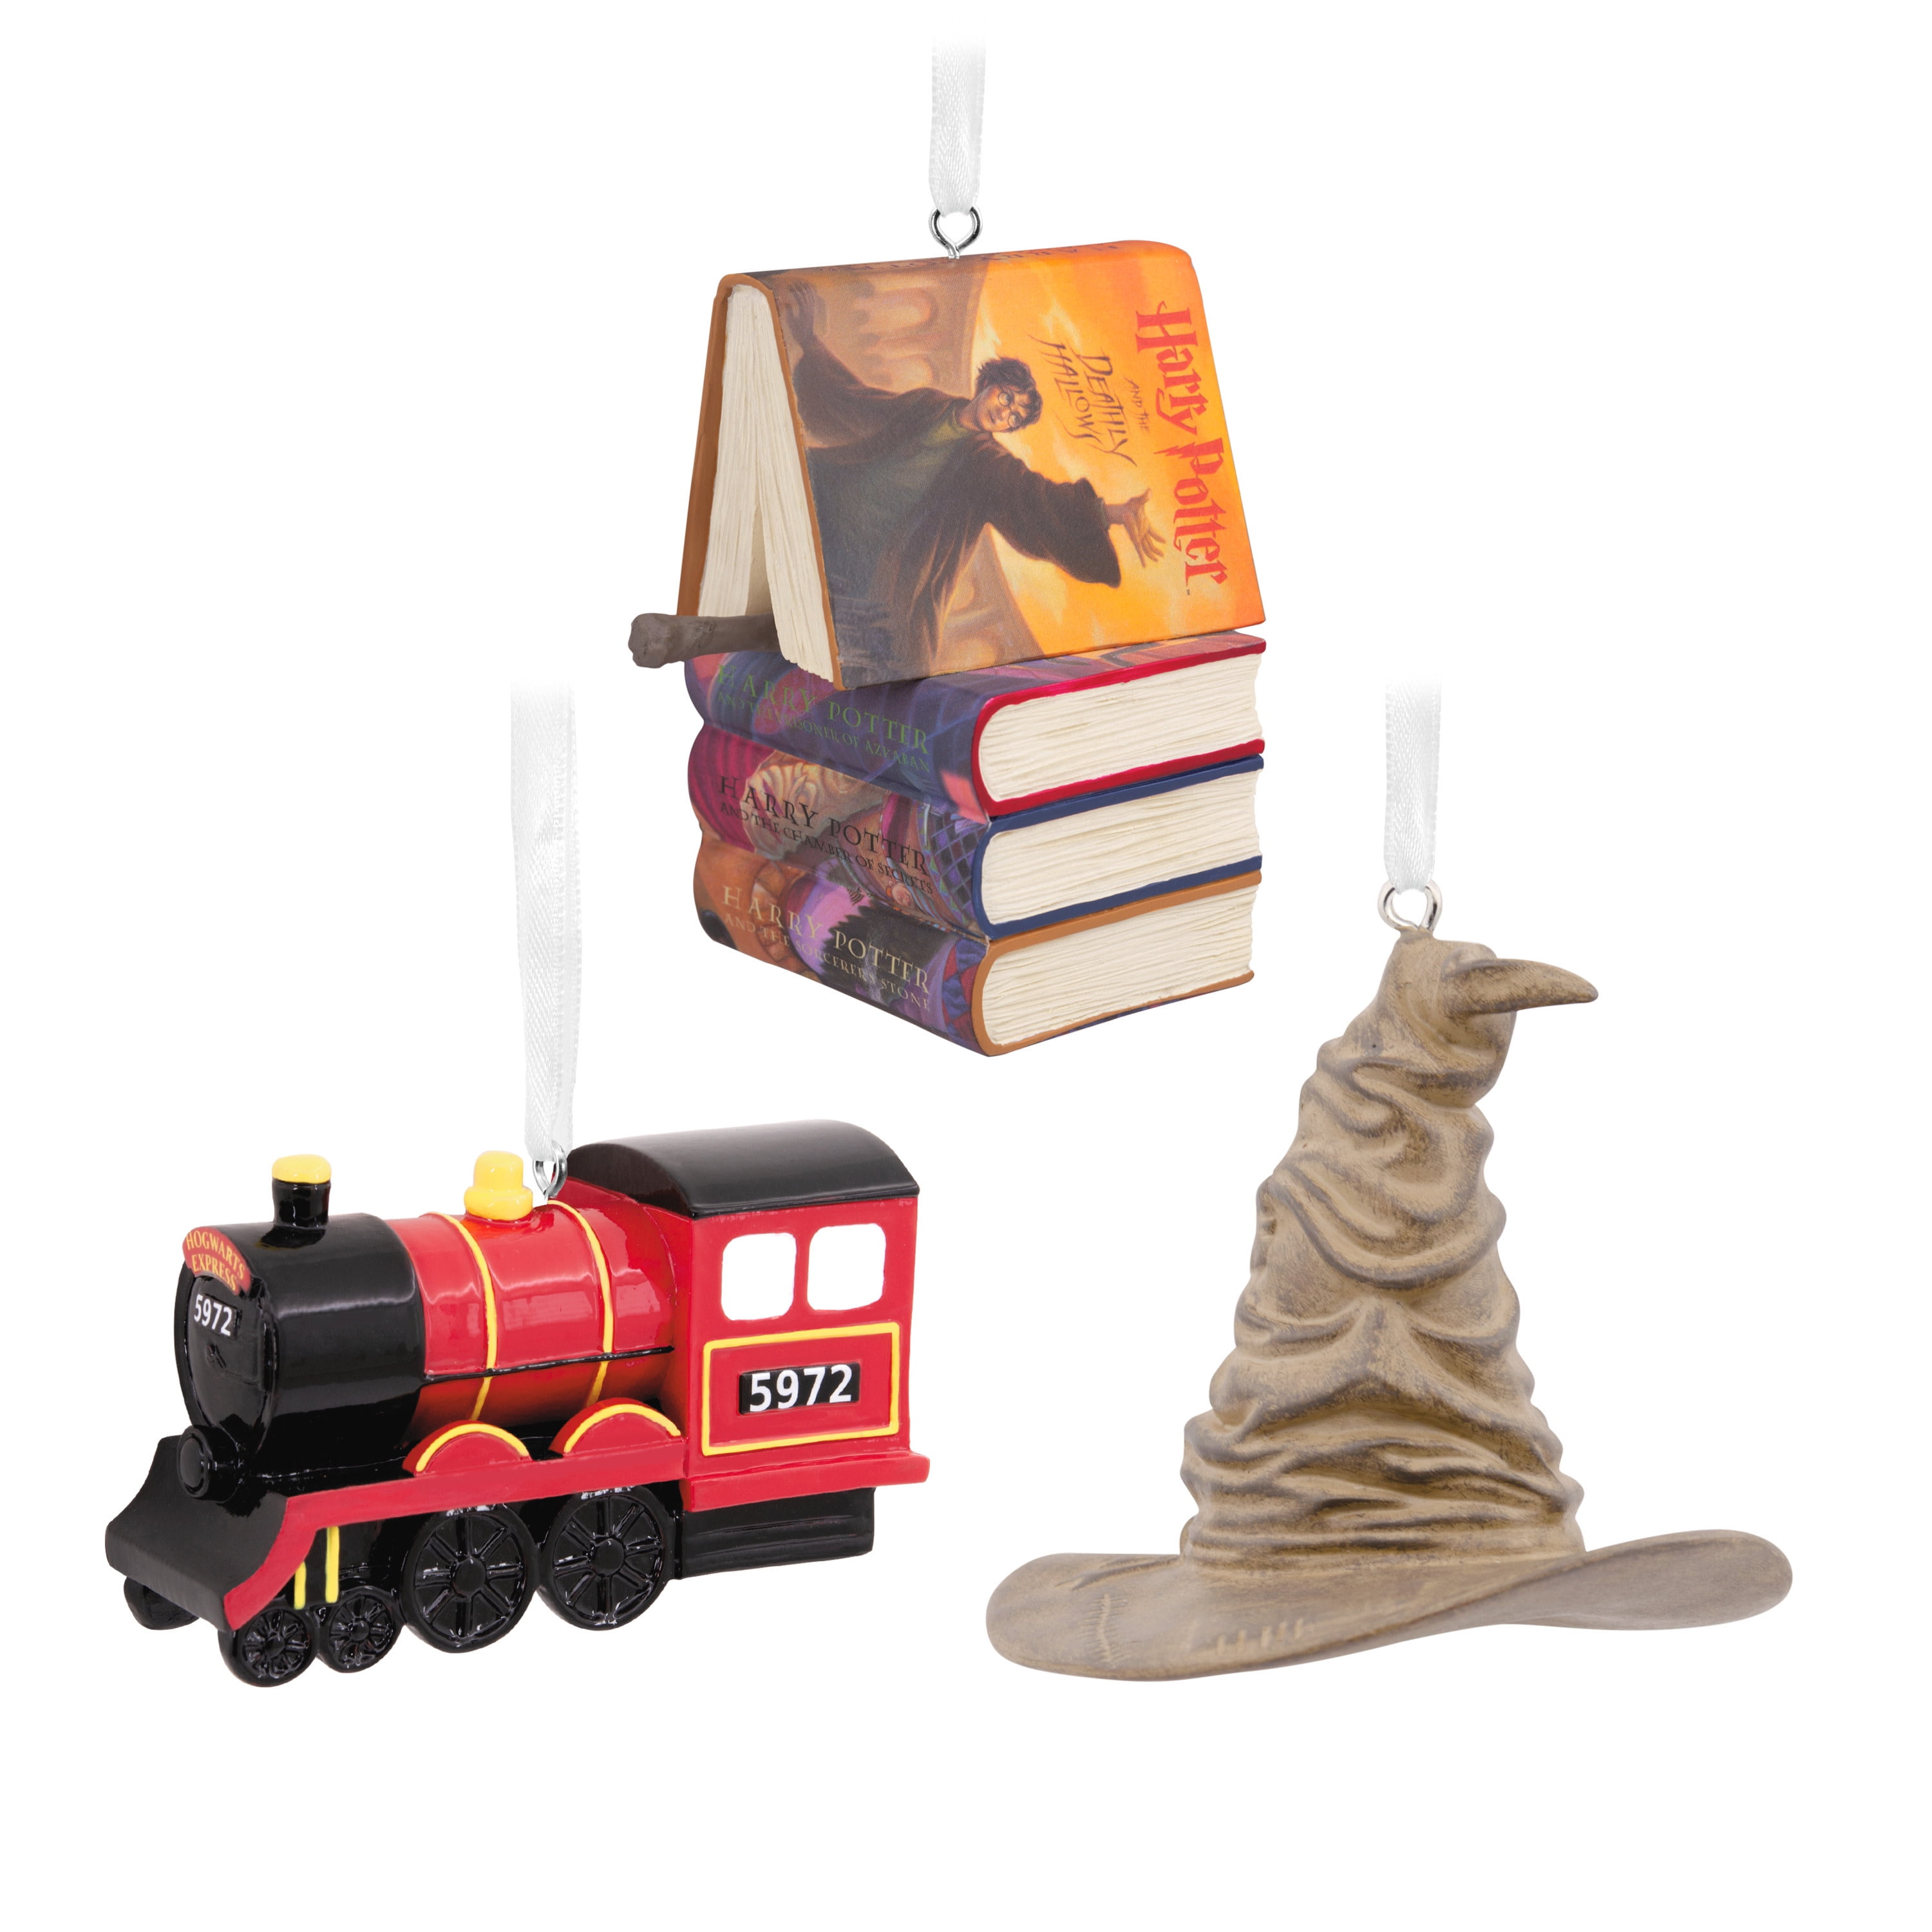 Lot of 2 Hallmark Harry Potter Ornaments Books and Wand & castle